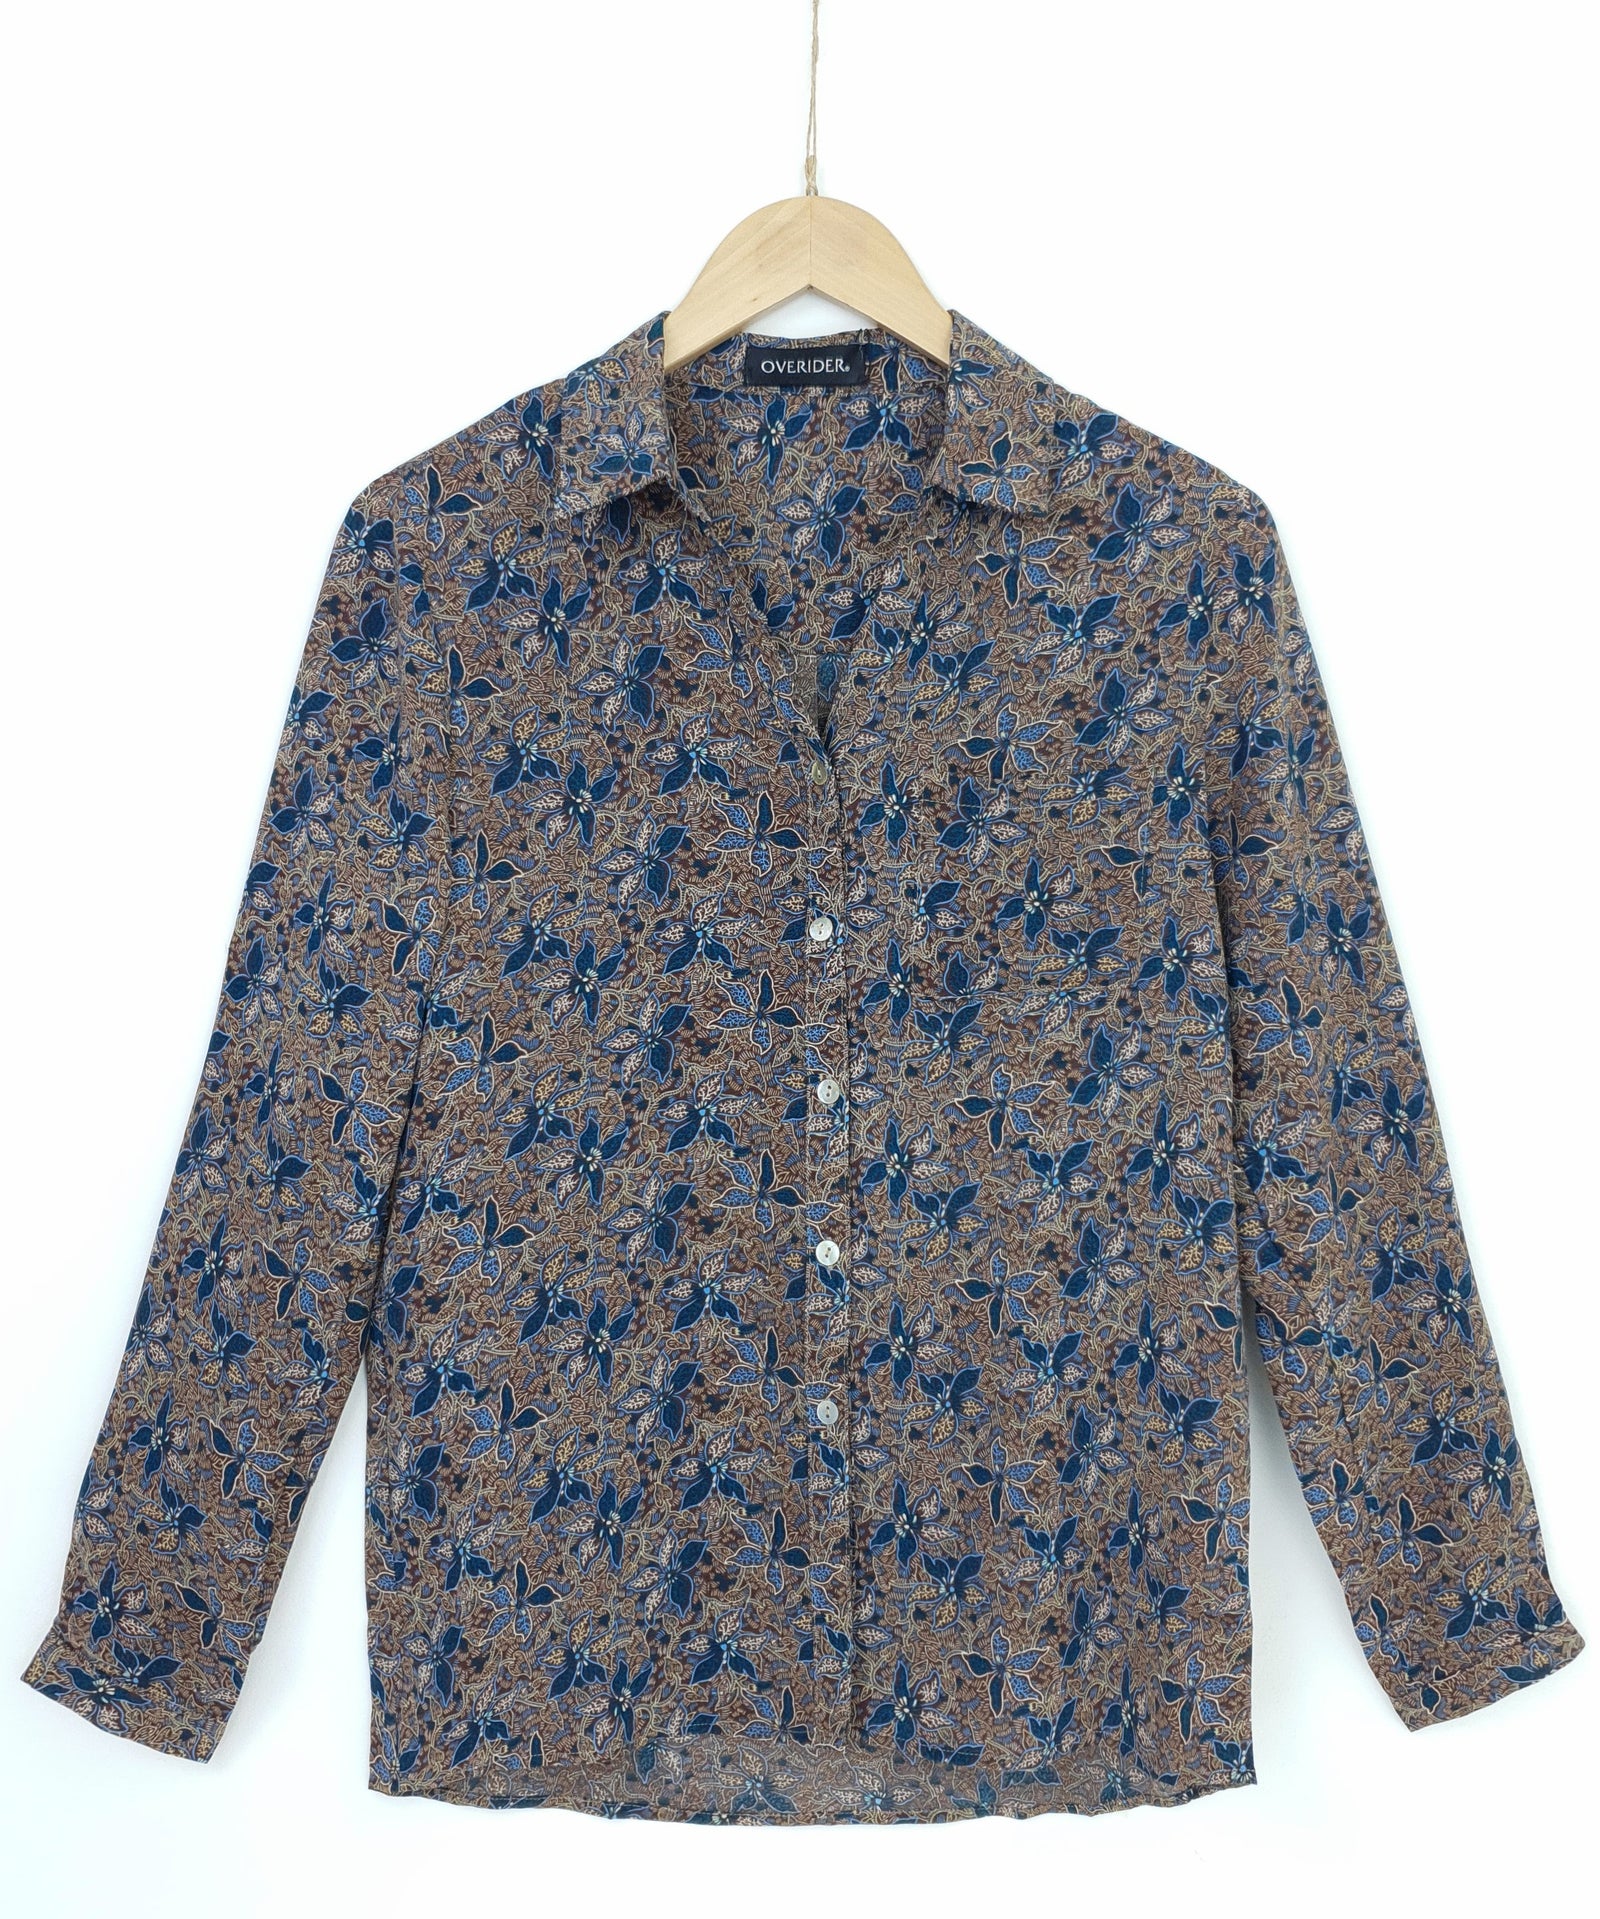 ELISO | Patterned Fluid Shirt | Navy & Tobacco